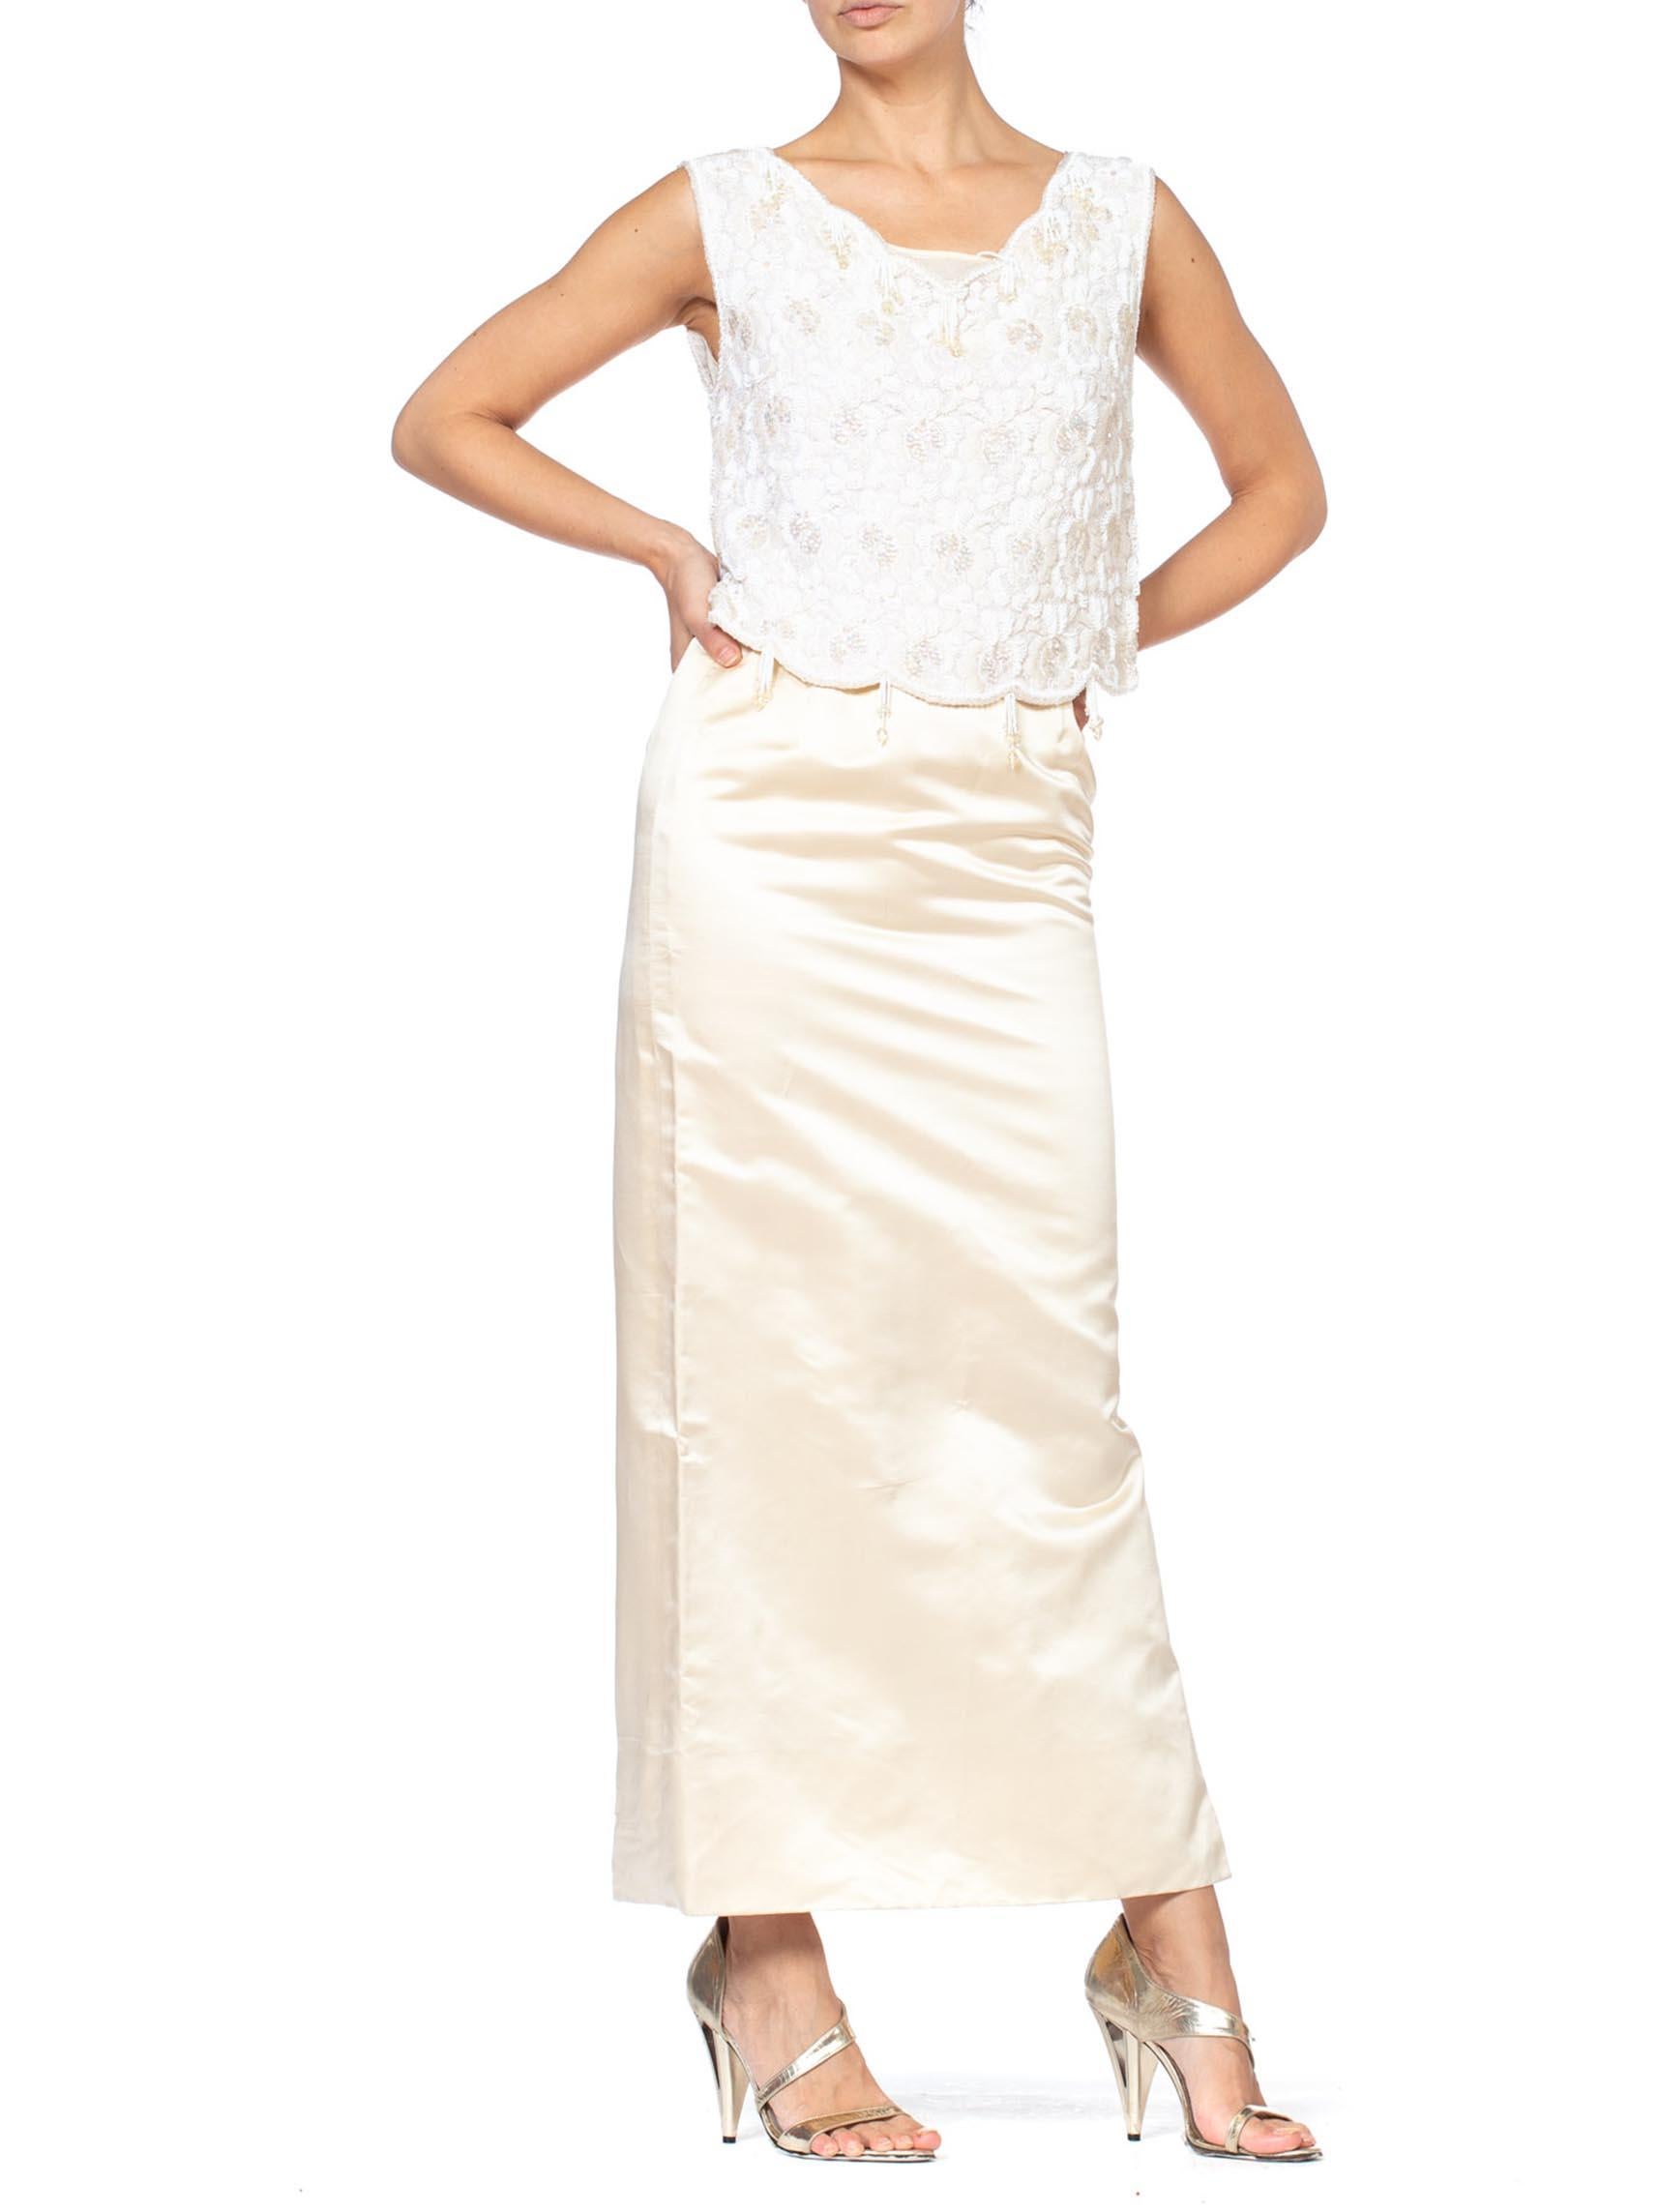 1960S White & Ivory Silk Satin Evening Gown Ensemble With Beaded Lace Tunic In Excellent Condition For Sale In New York, NY